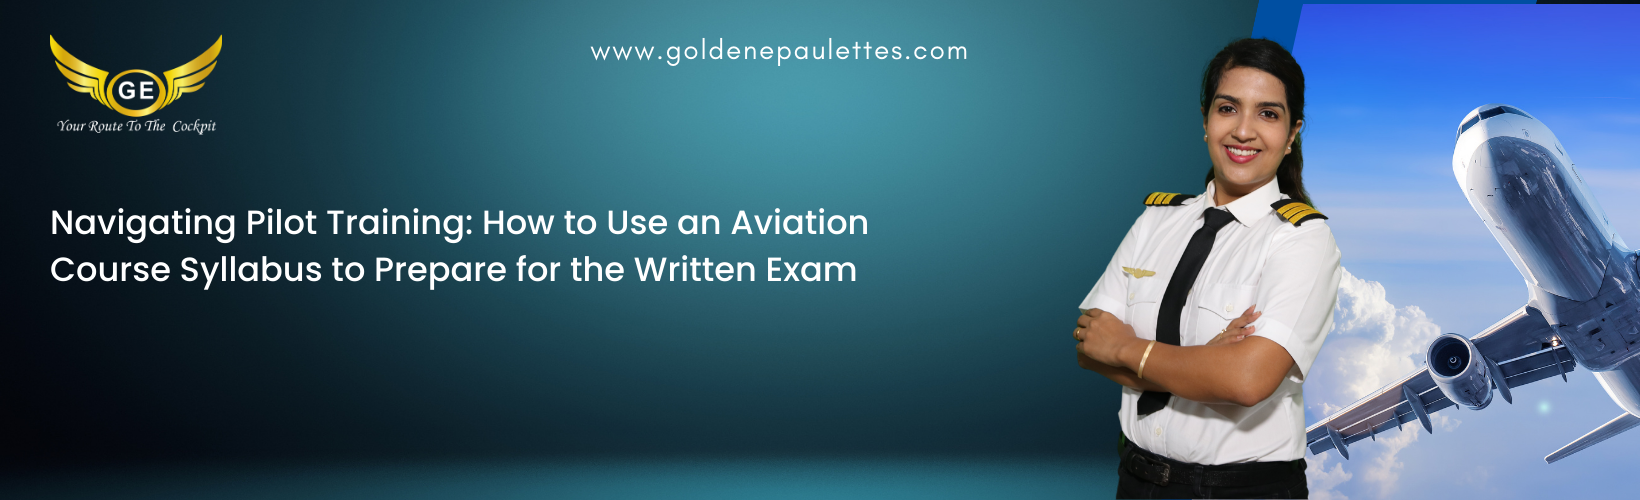 Aviation Course Books and Resources